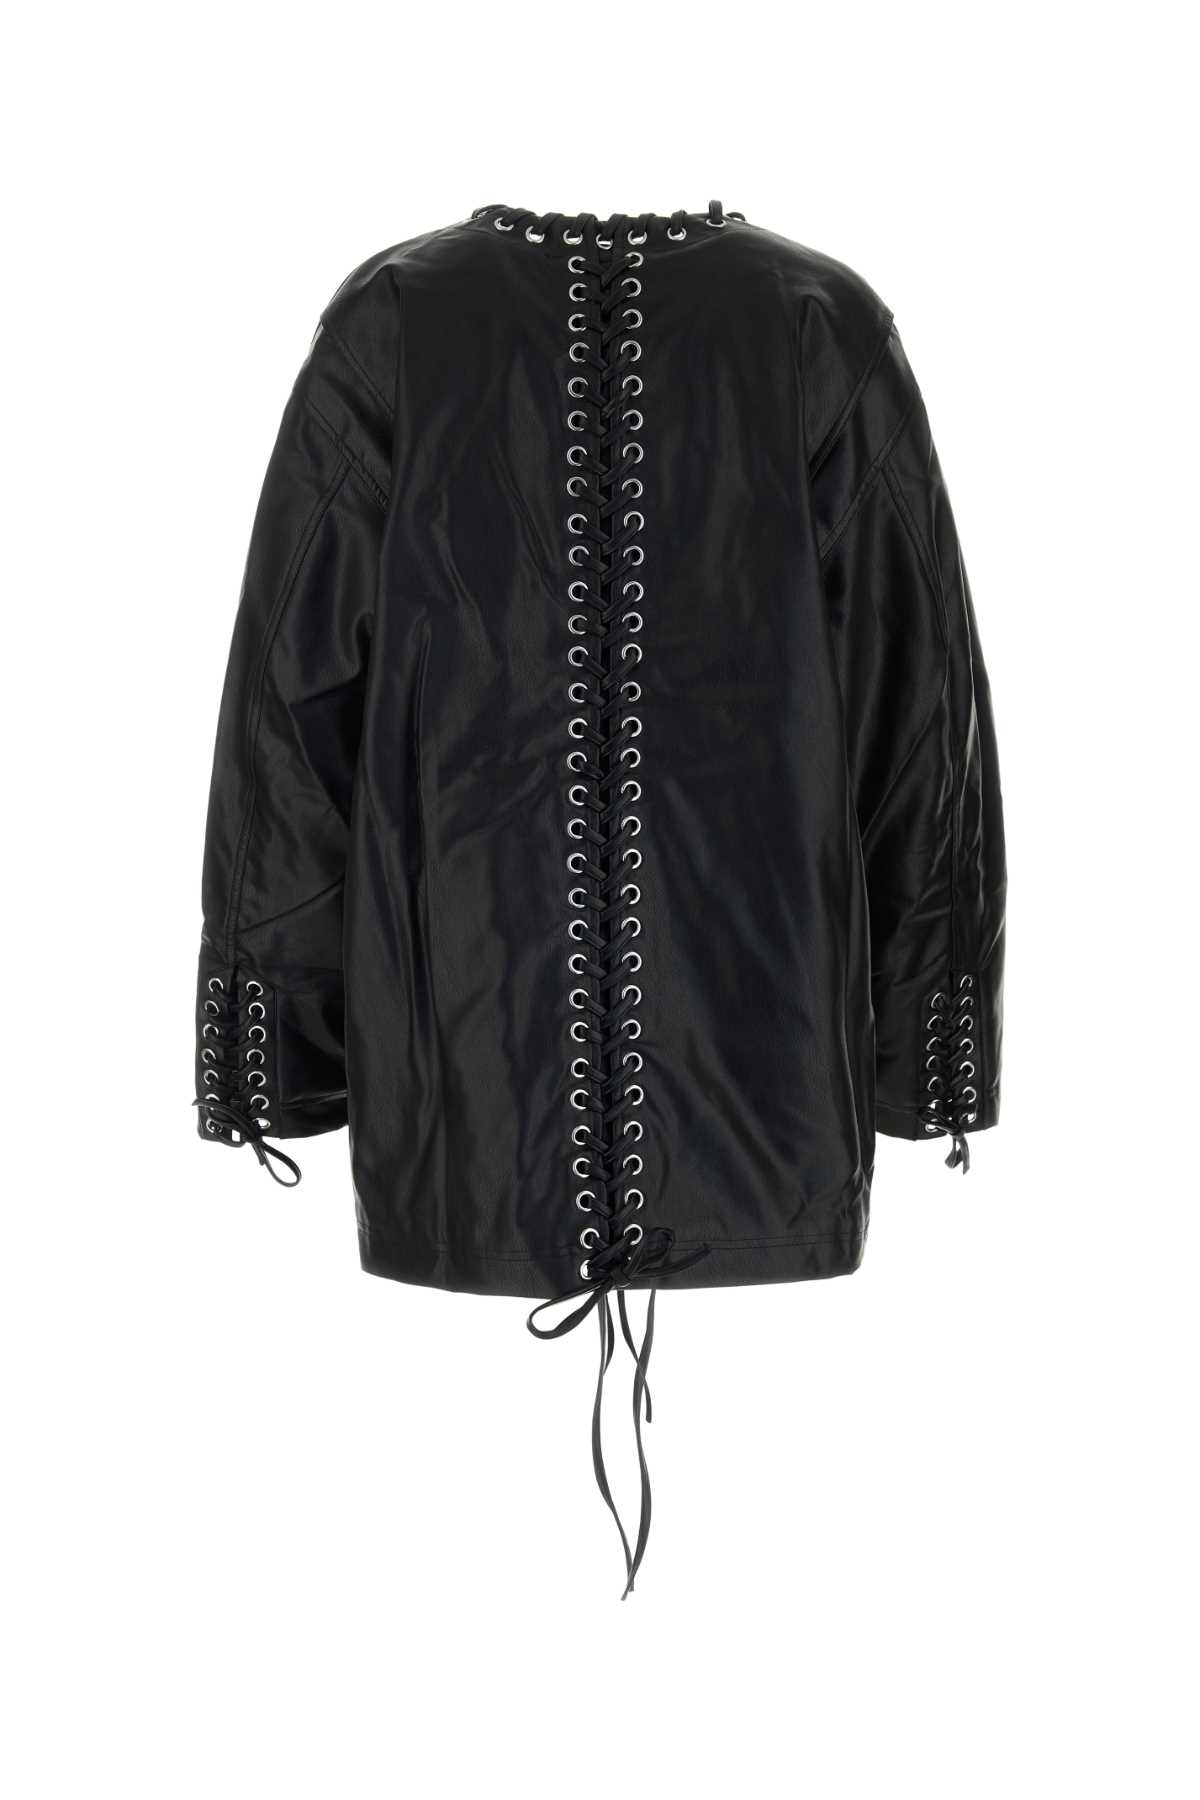 Rotate Birger Christensen Black Synthetic Leather Jacket